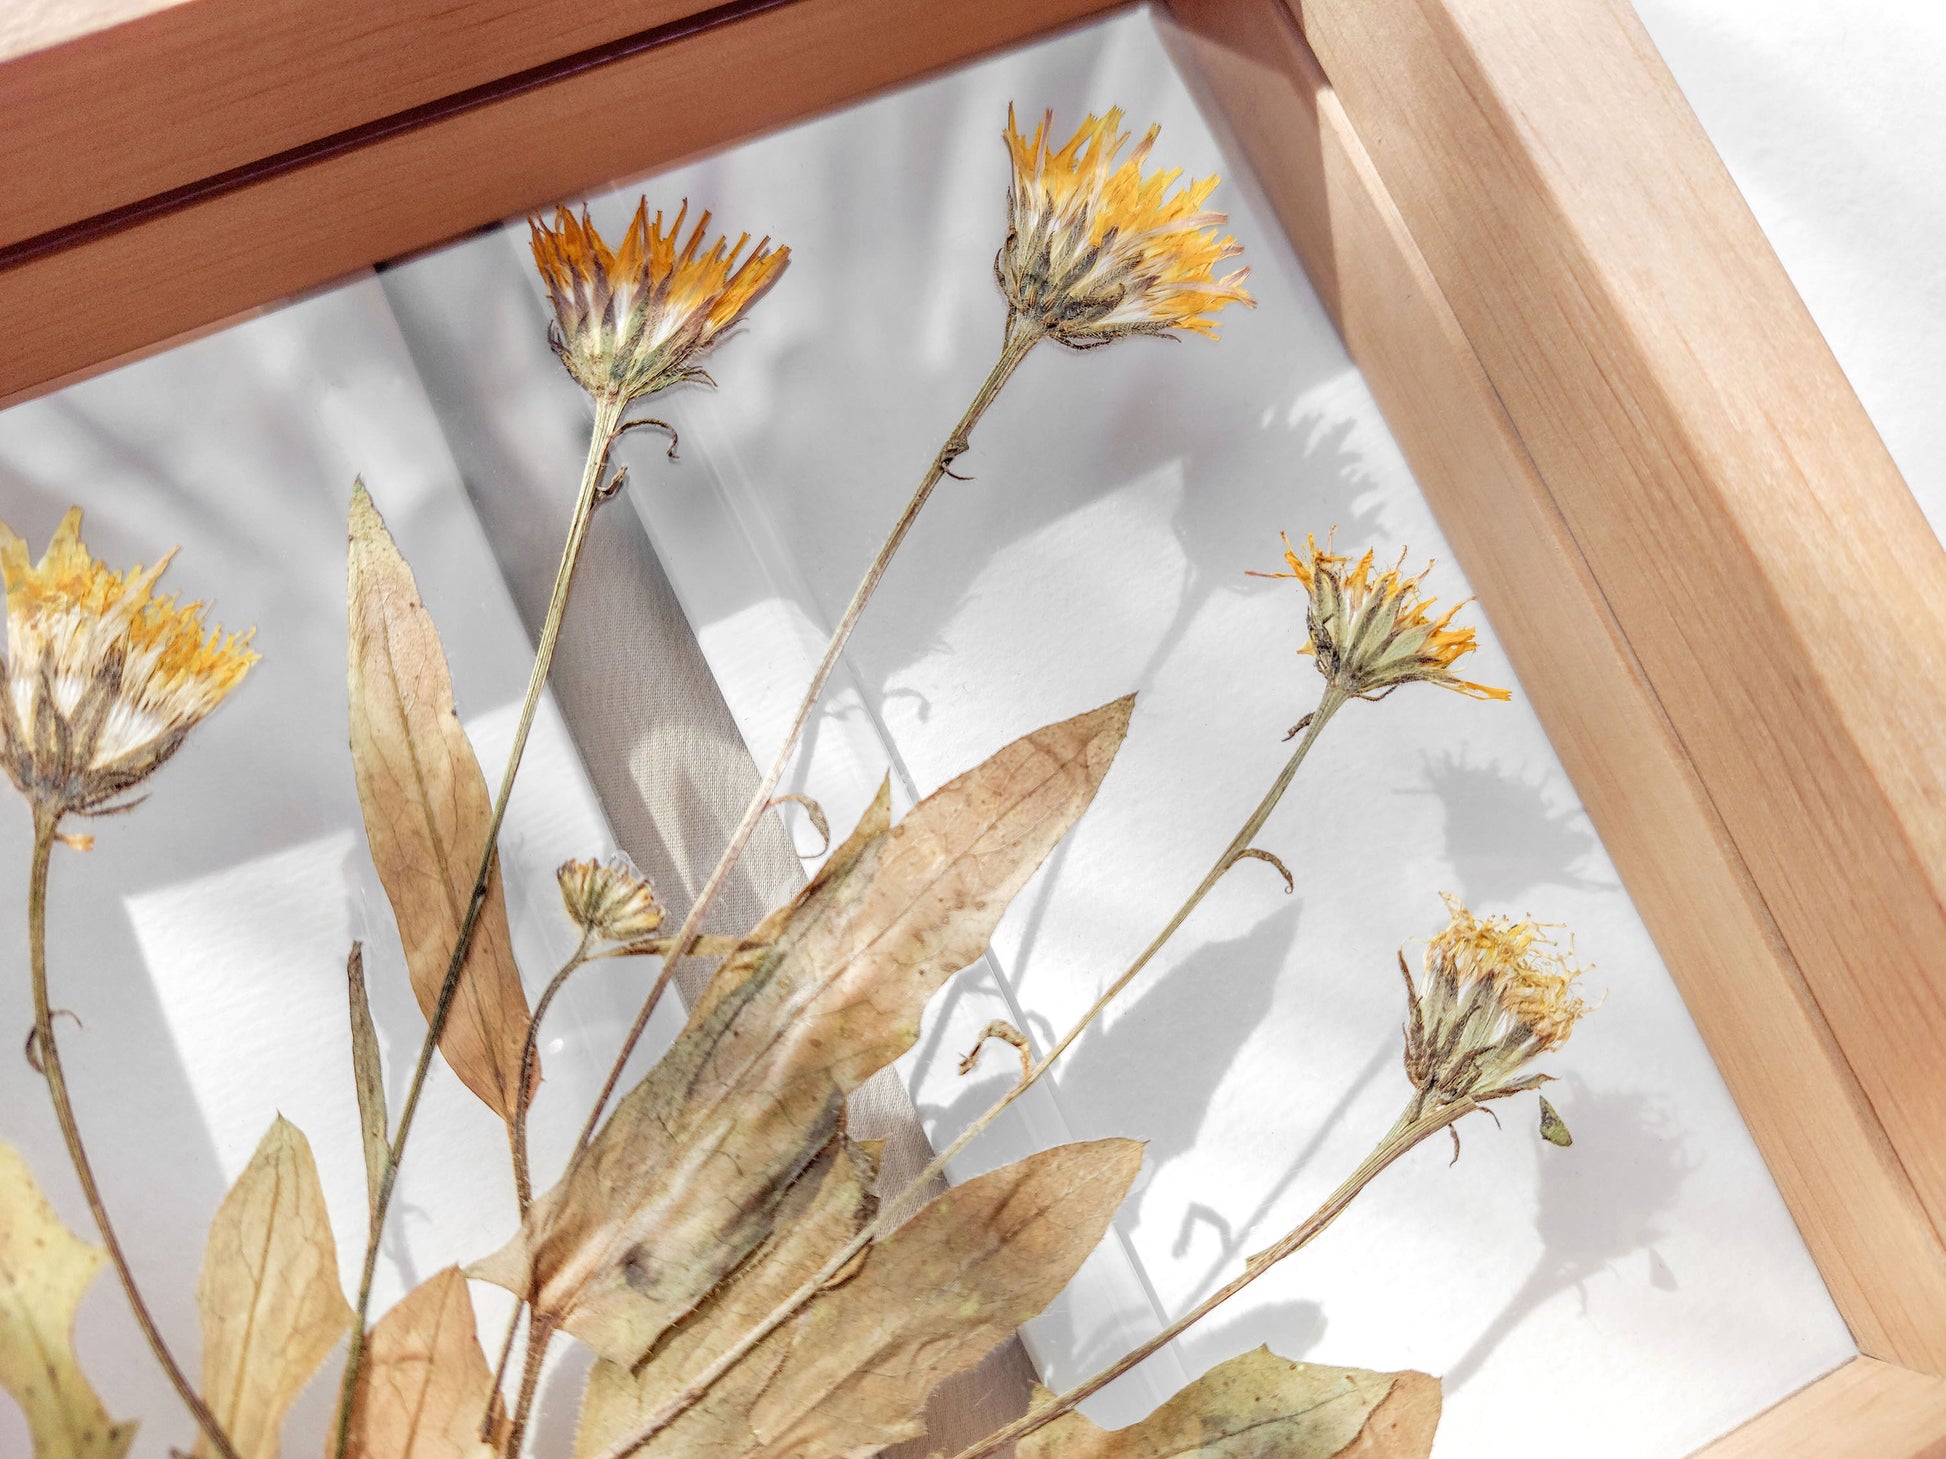 Details Real wild yellow pressed flower and plant artwork with wooden square